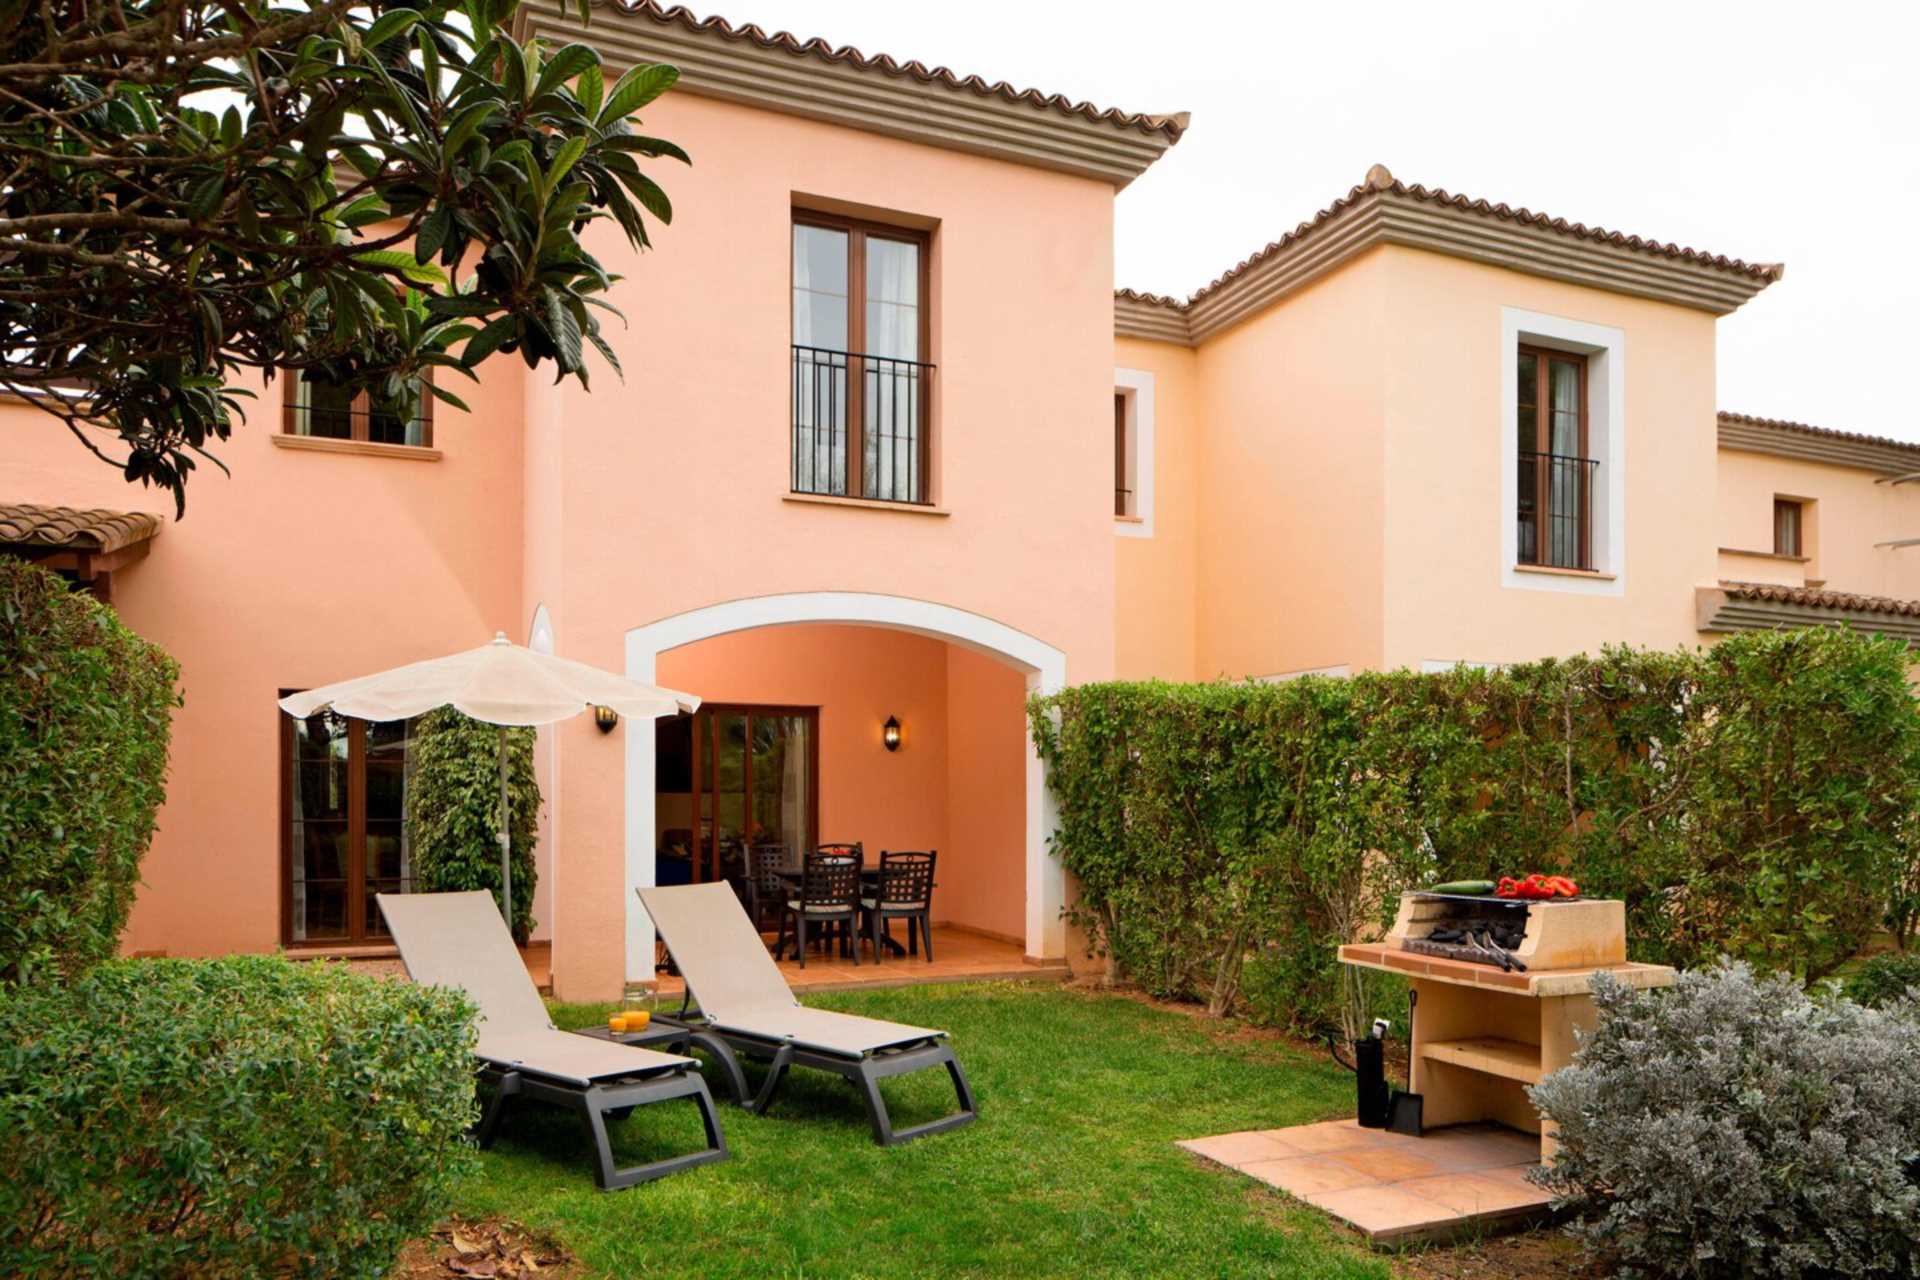 RENT  A DREAM LAST MINUTE DEAL IN MAJORICIA ONE WEEK FROM 5TH MAY TO 11TH MAY, Image 2